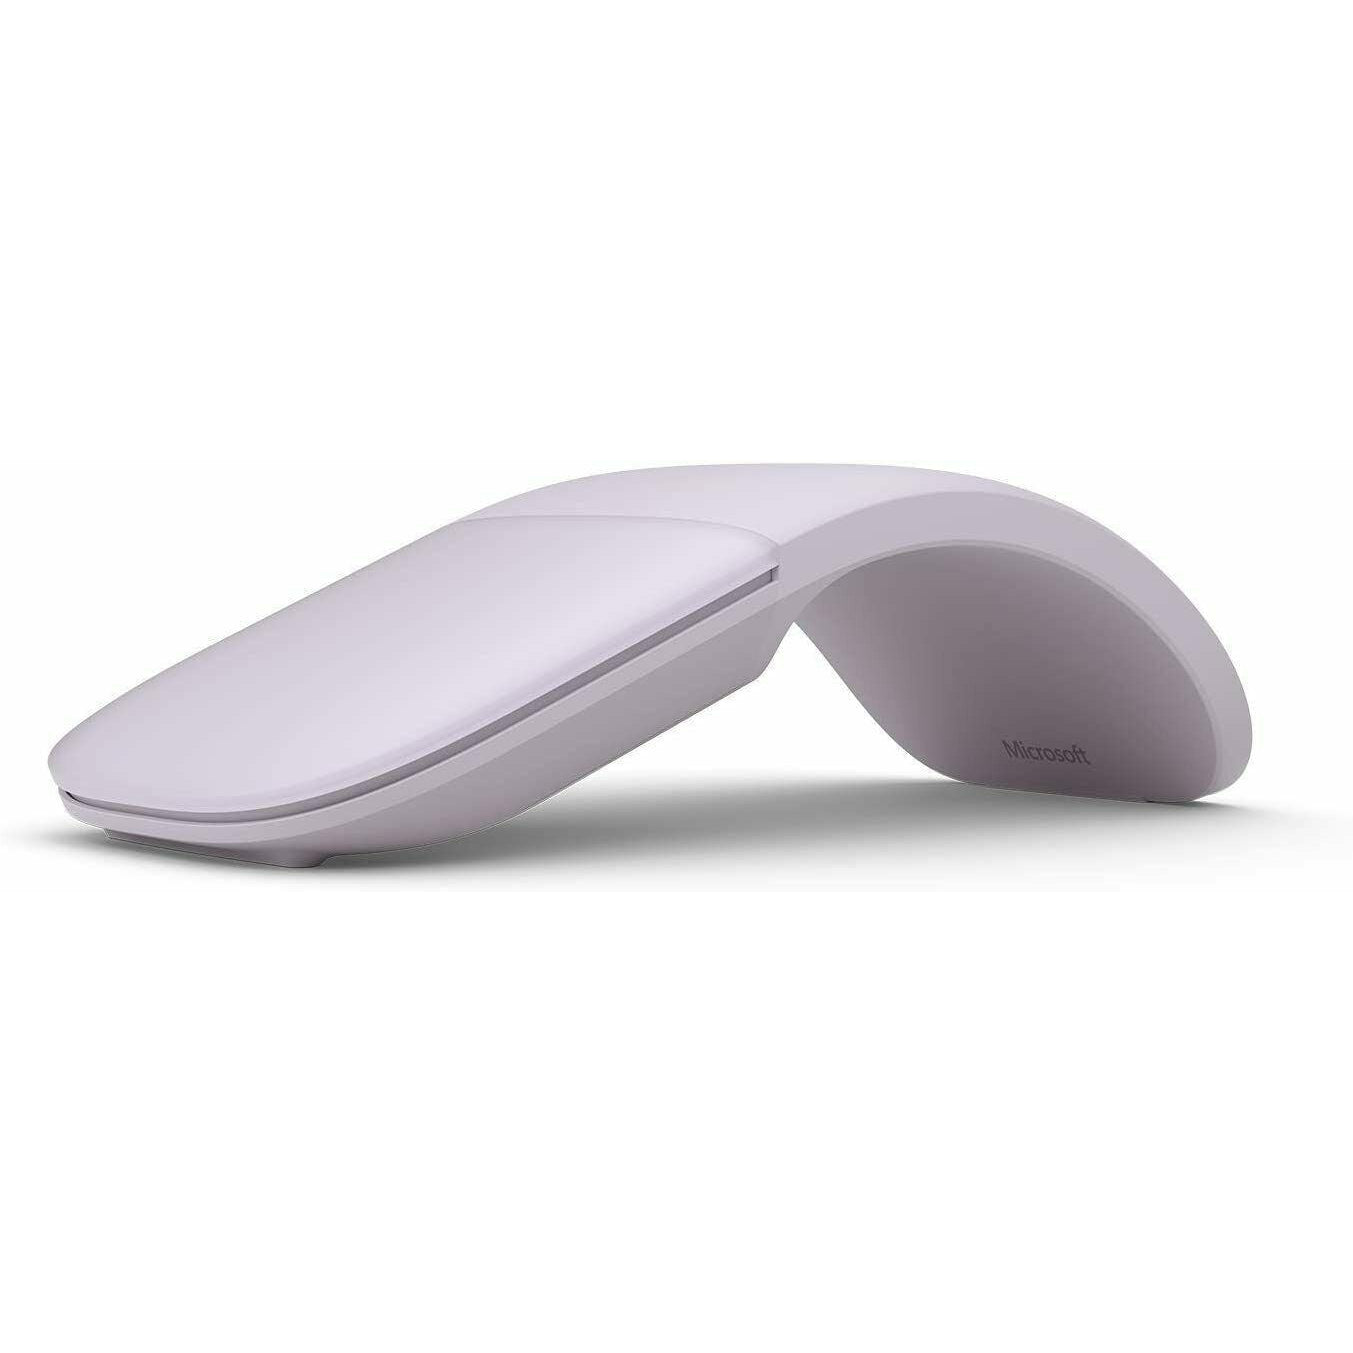 Microsoft Arc Bluetooth Wireless Touch Mouse - All Colours